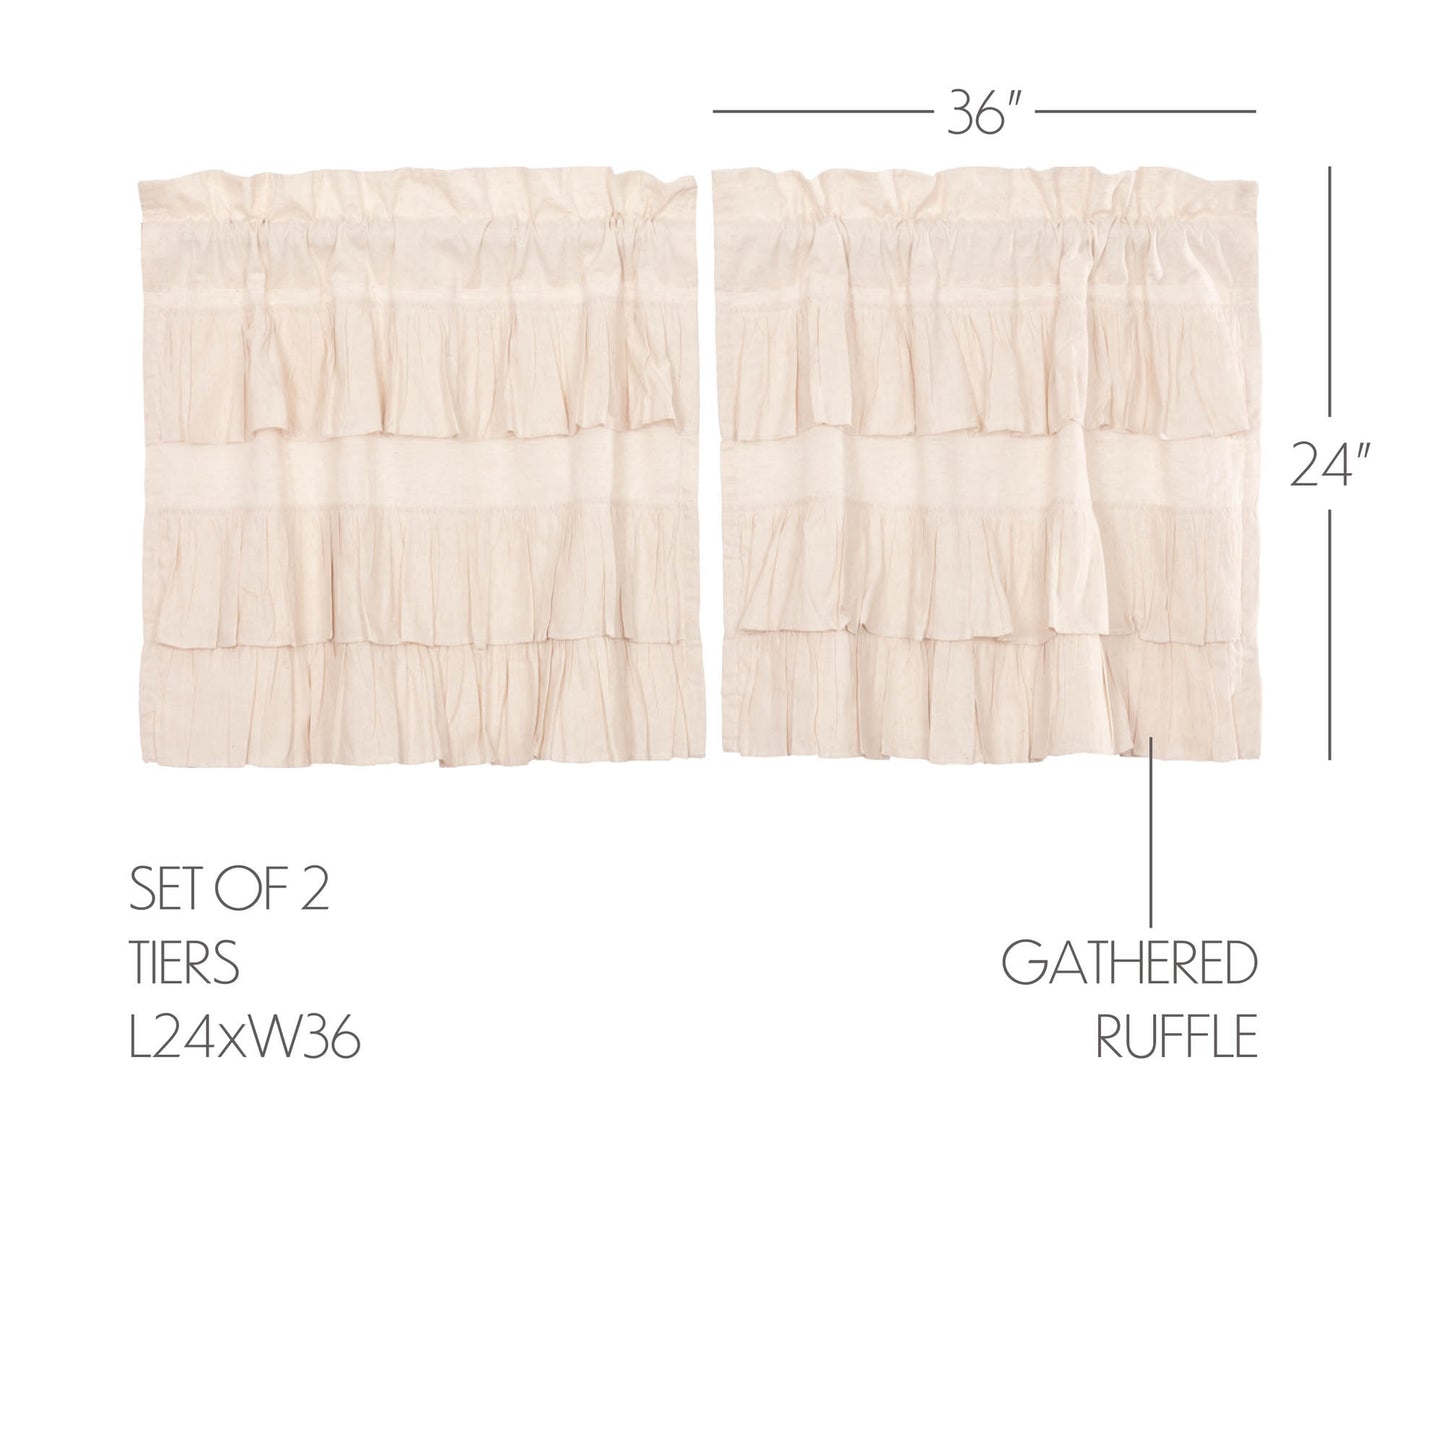 51968-Simple-Life-Flax-Natural-Ruffled-Tier-Set-of-2-L24xW36-image-1